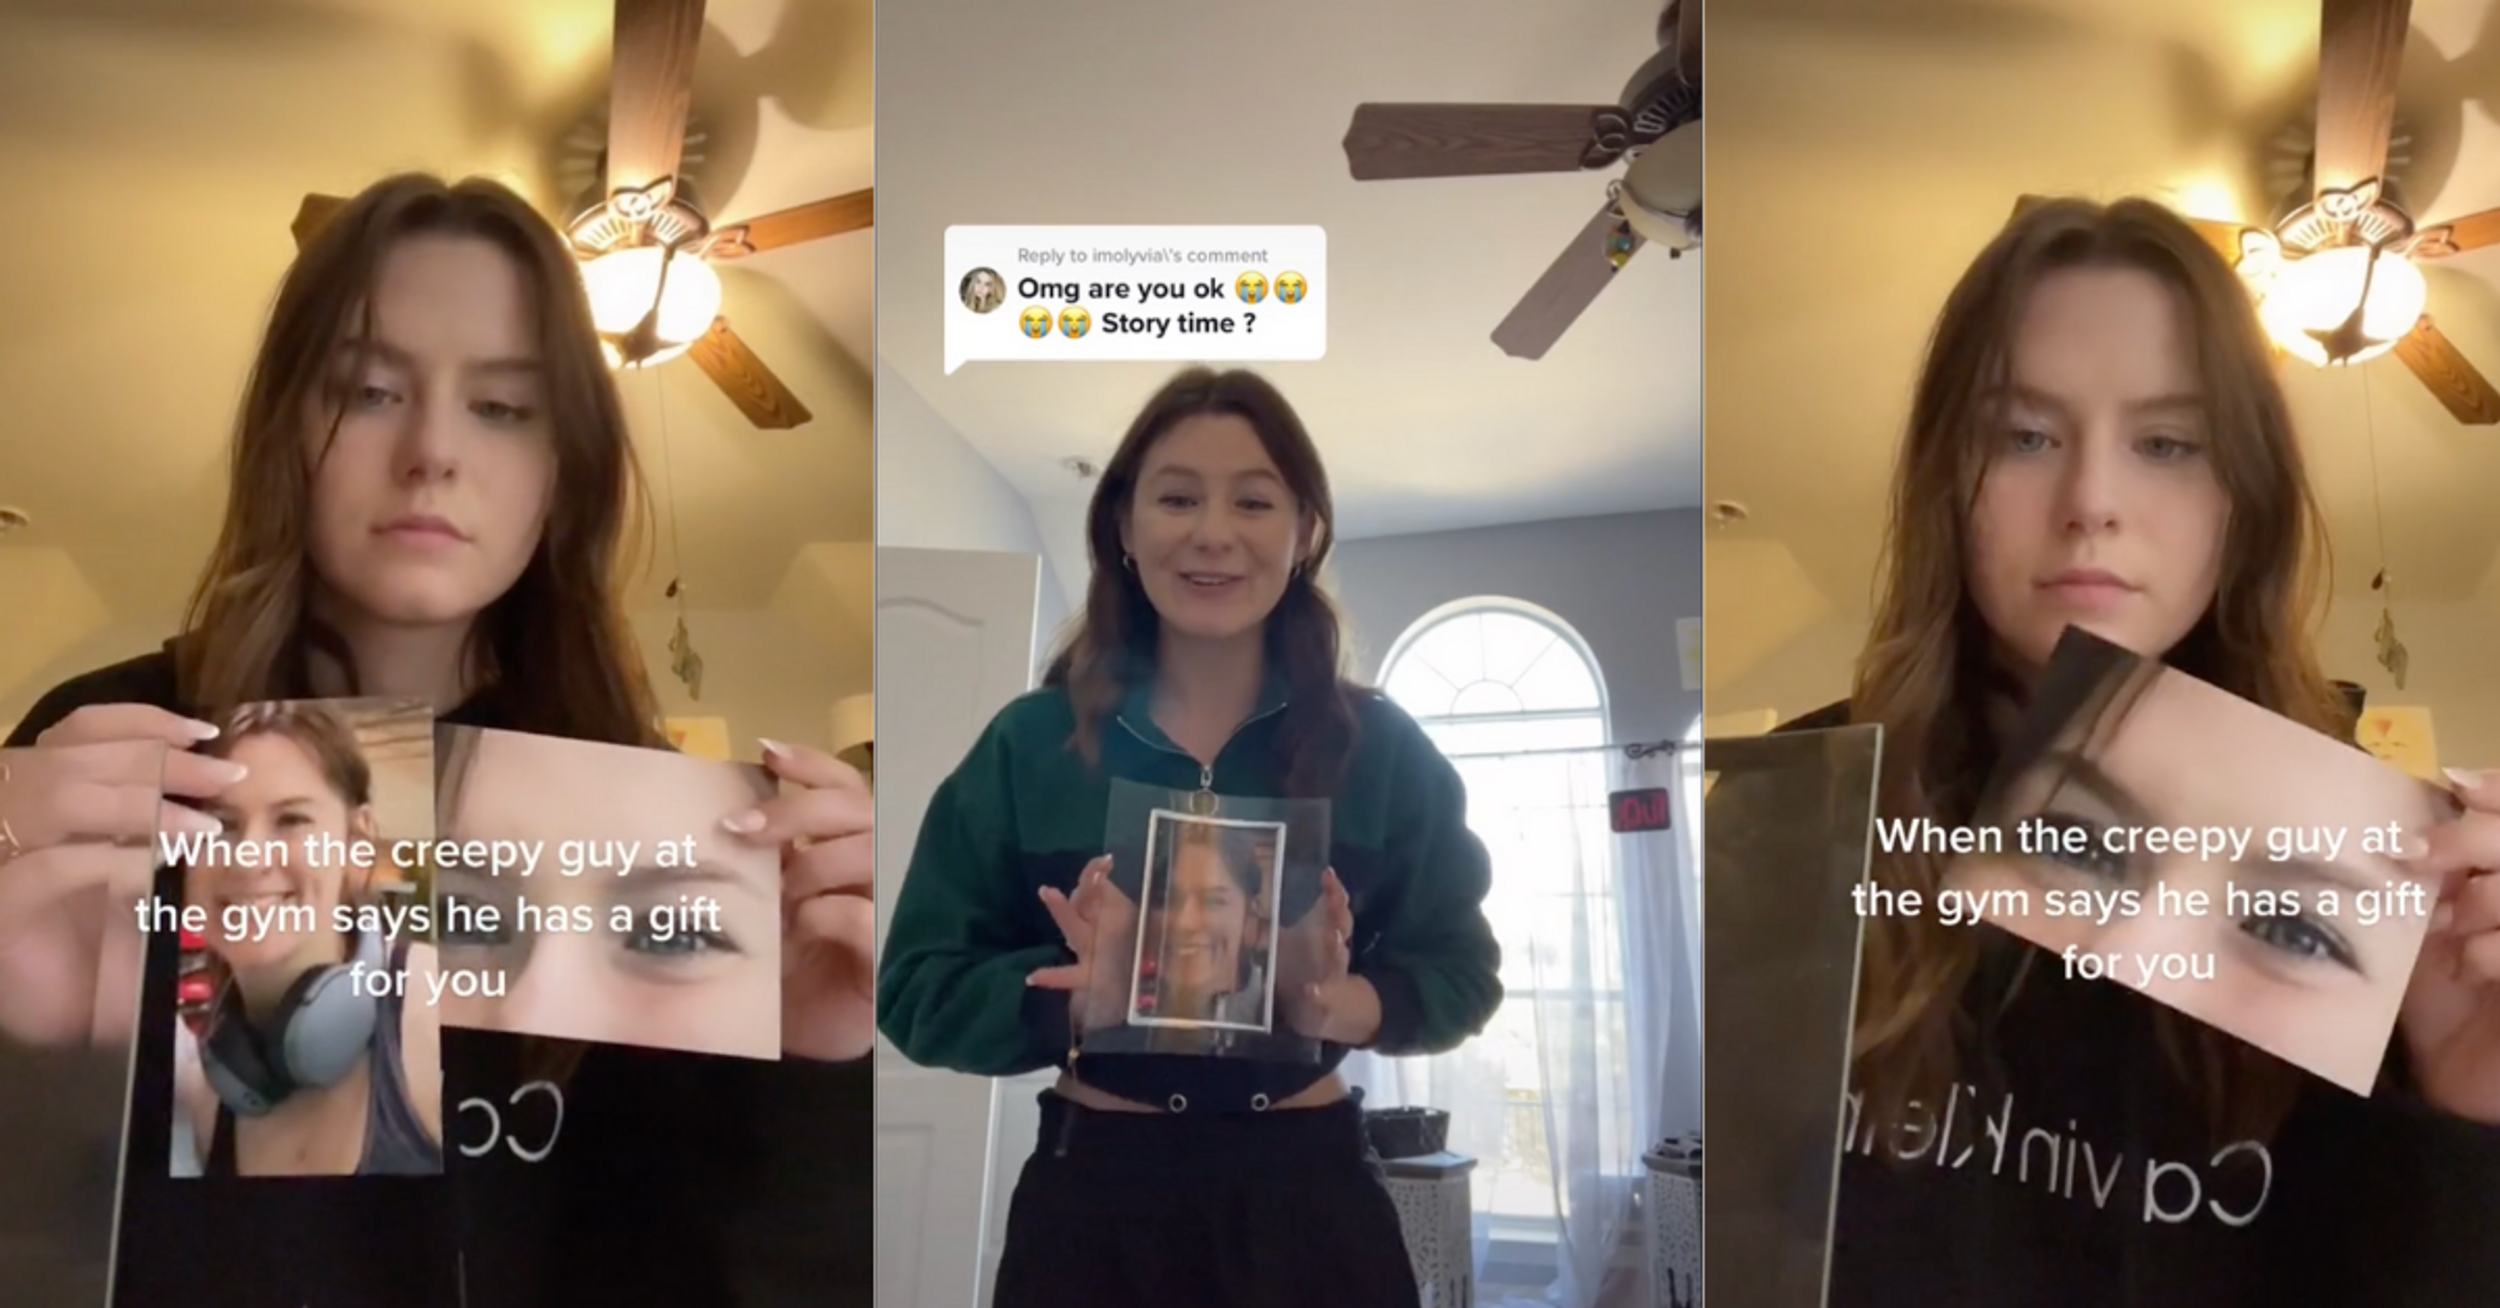 Woman Speaks Out After 'Creepy Guy' At Gym Gives Her A Framed Photo Of Herself As A 'Gift'